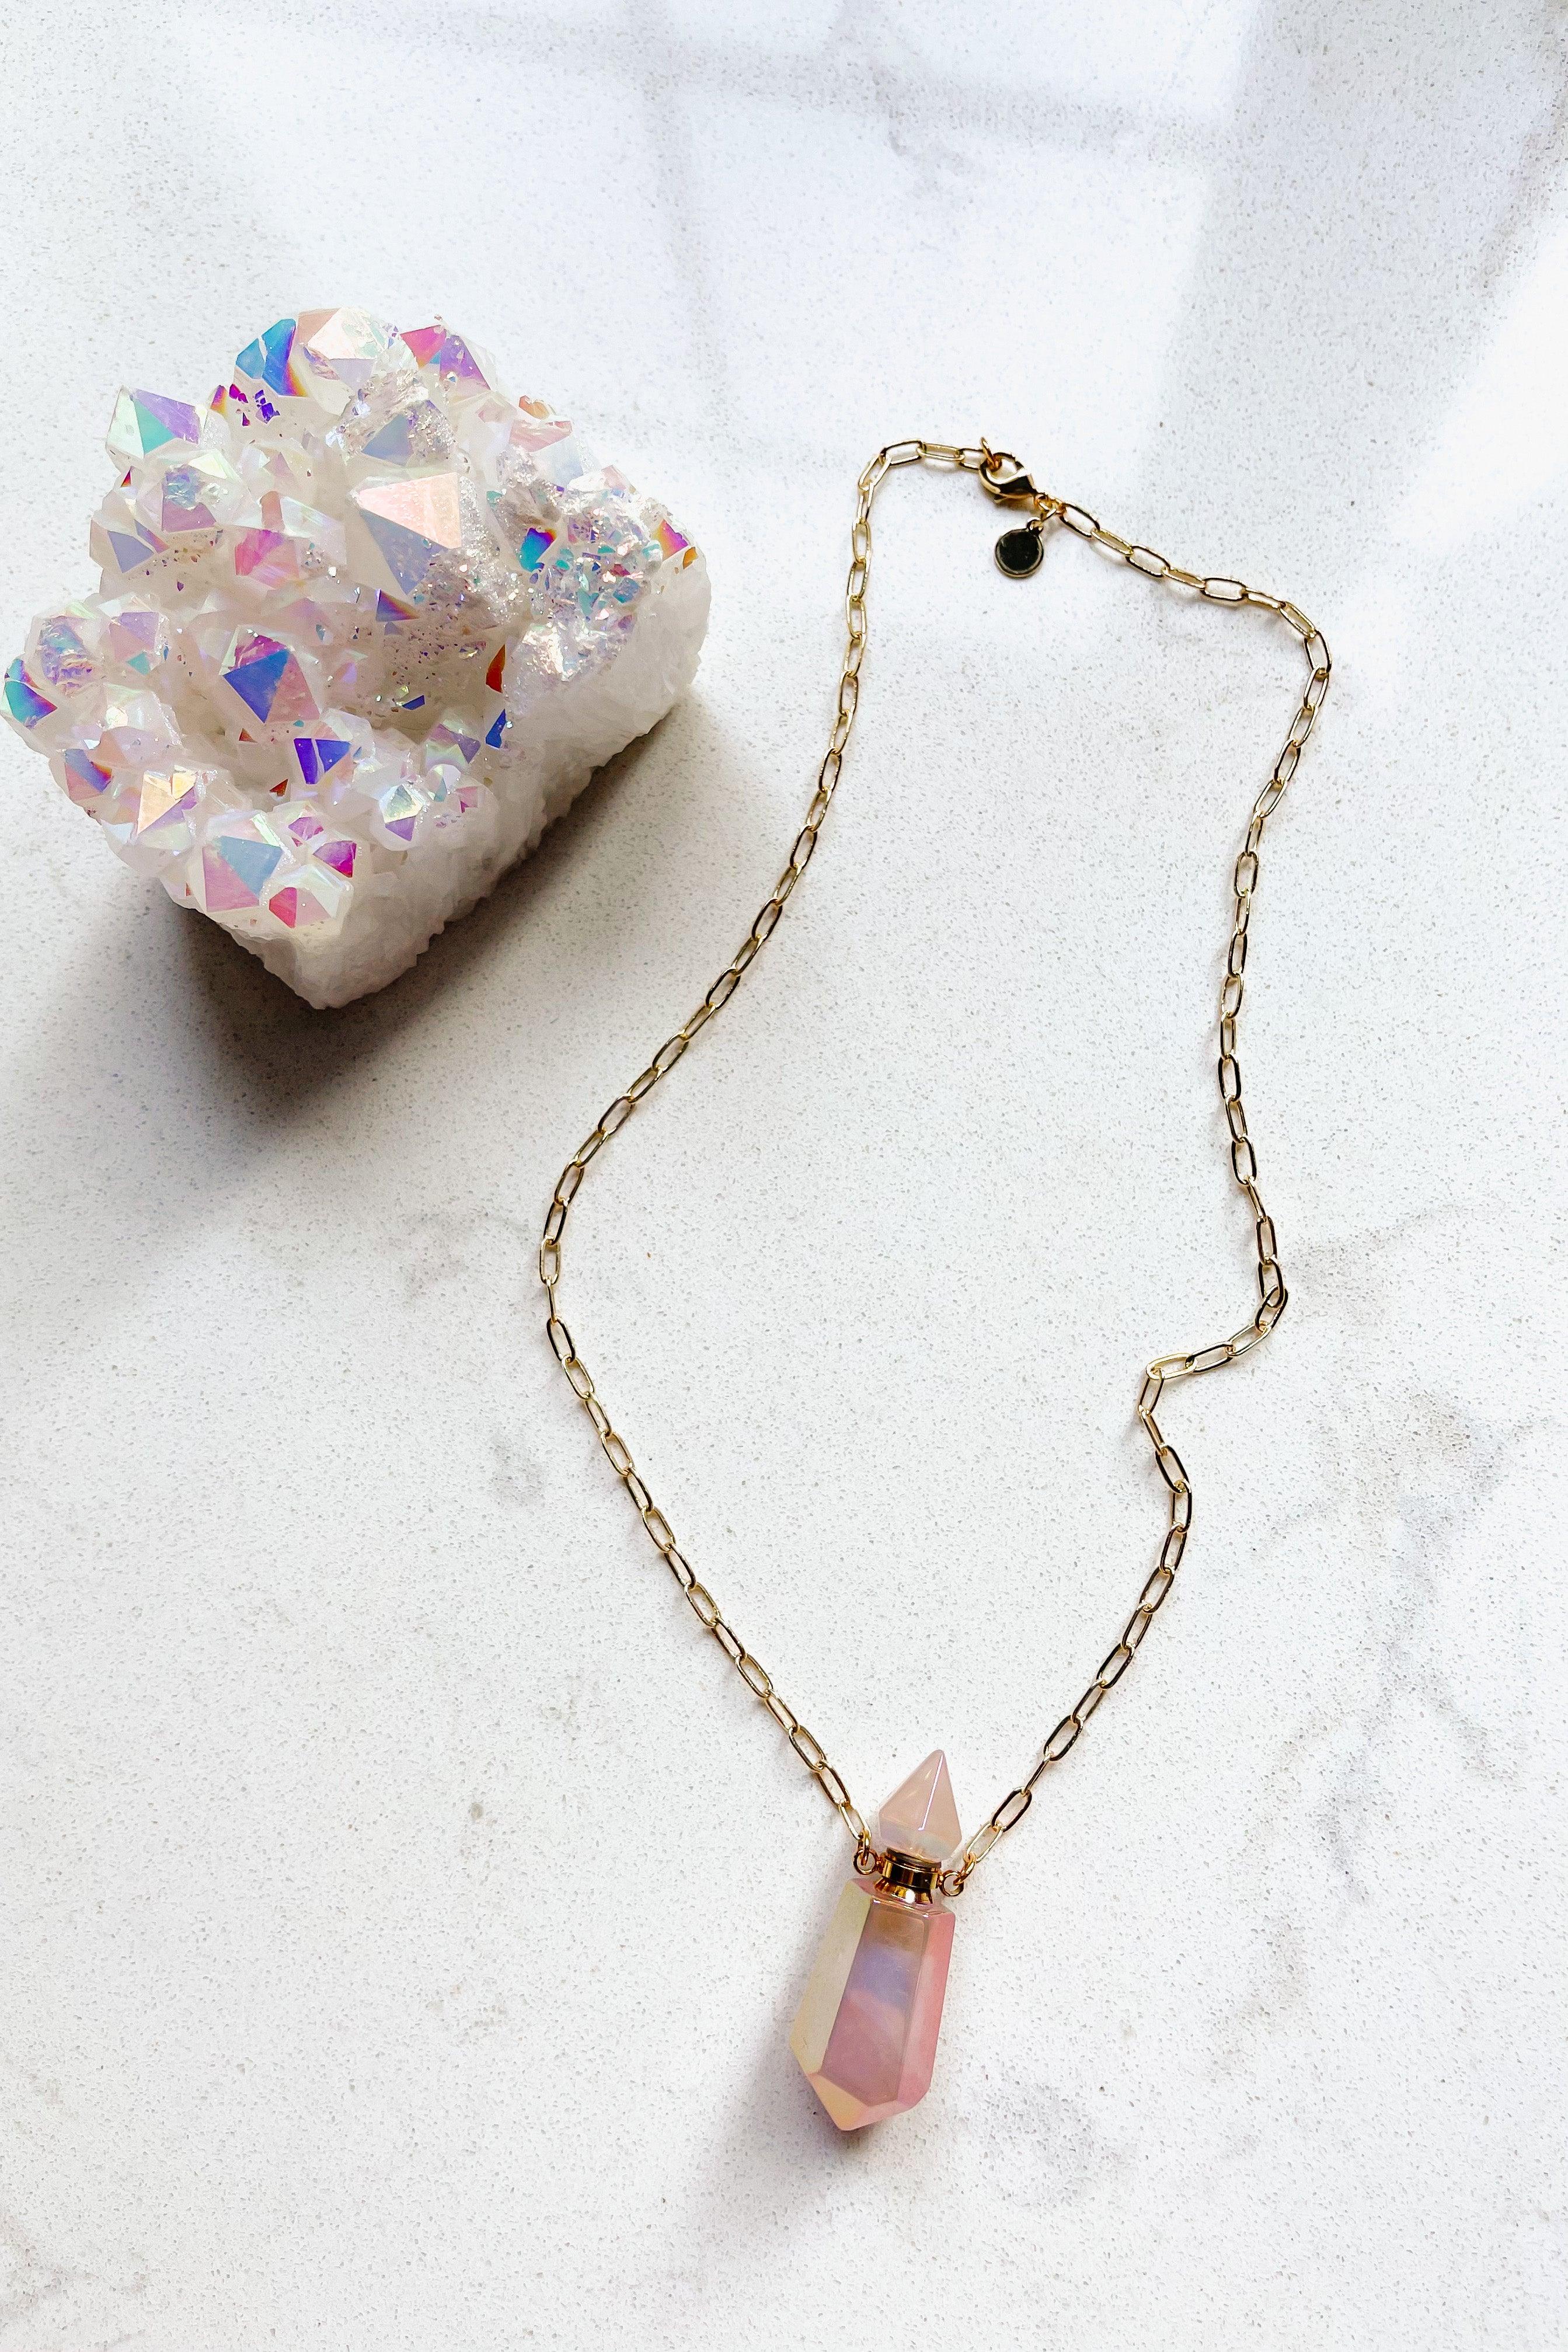 Calliope Crystal Diffuser Necklace - Atomic Wildflower